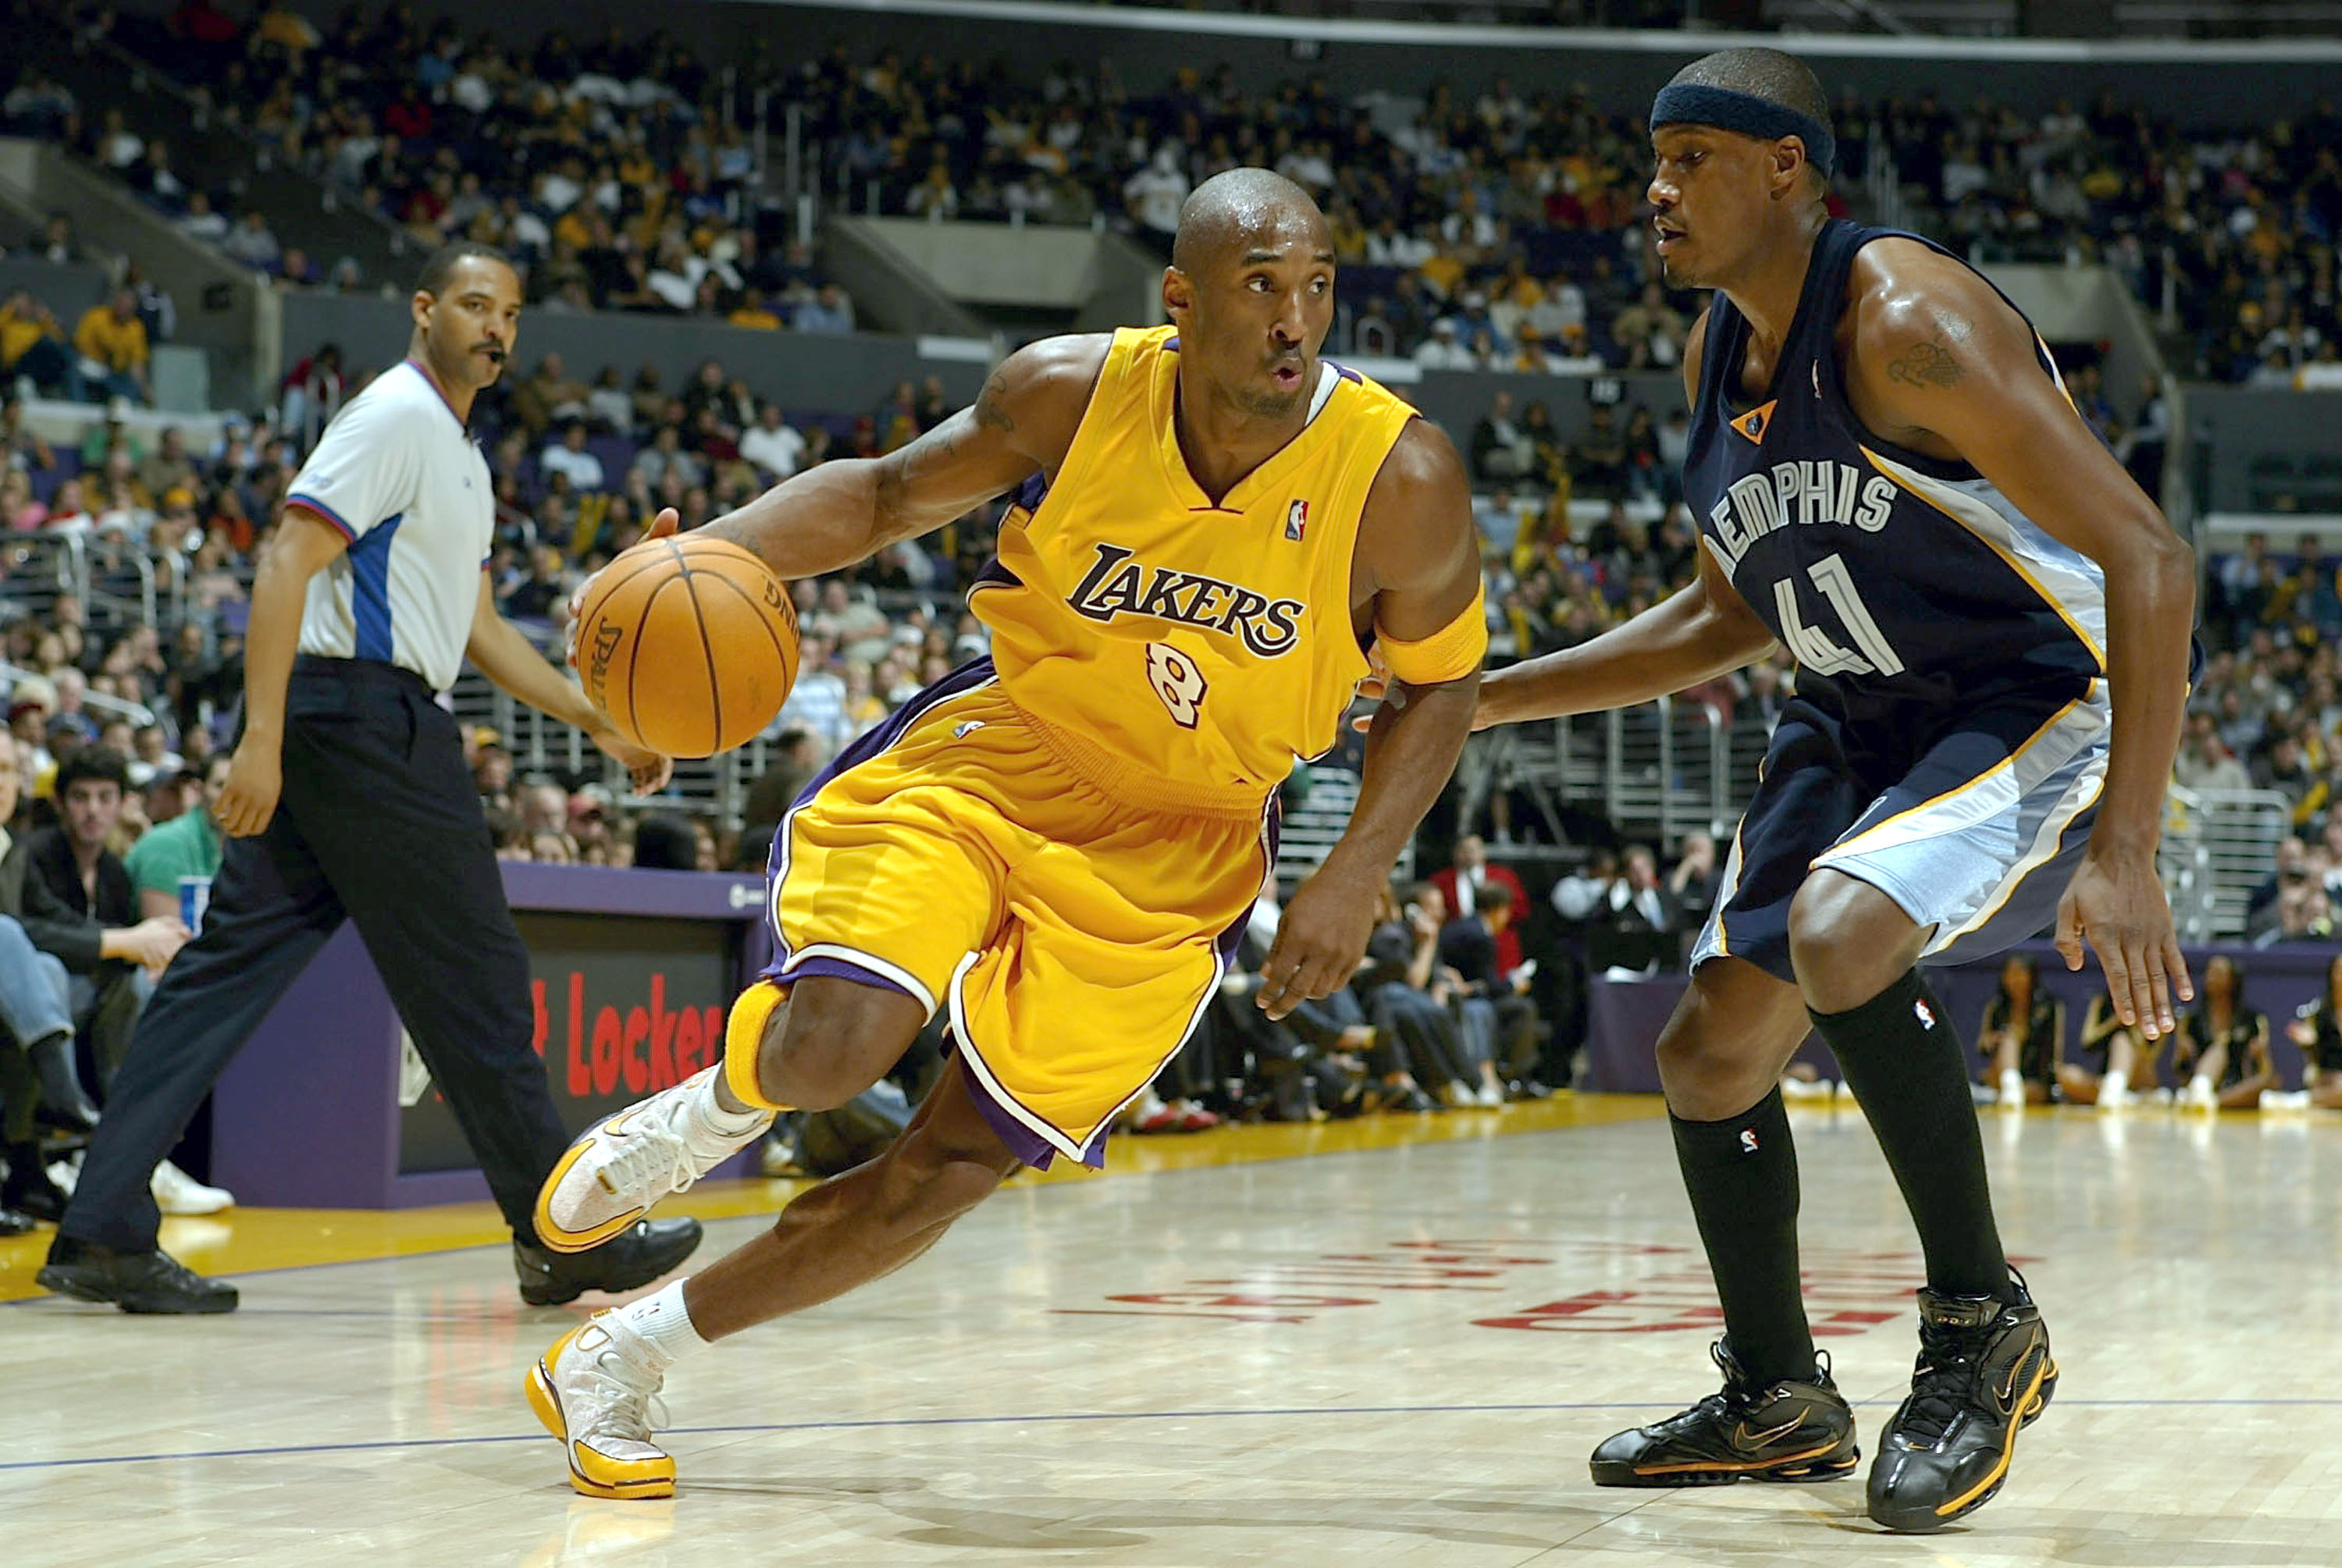 LOS ANGELES - DECEMBER 20:  Kobe Bryant #8 of the Los Angeles Lakers drives on James Posey #41 of the Memphis Grizzlies in the second half at Staples Center on December 20, 2004 in Los Angeles, California.   NOTE TO USER: User expressly acknowledges and a